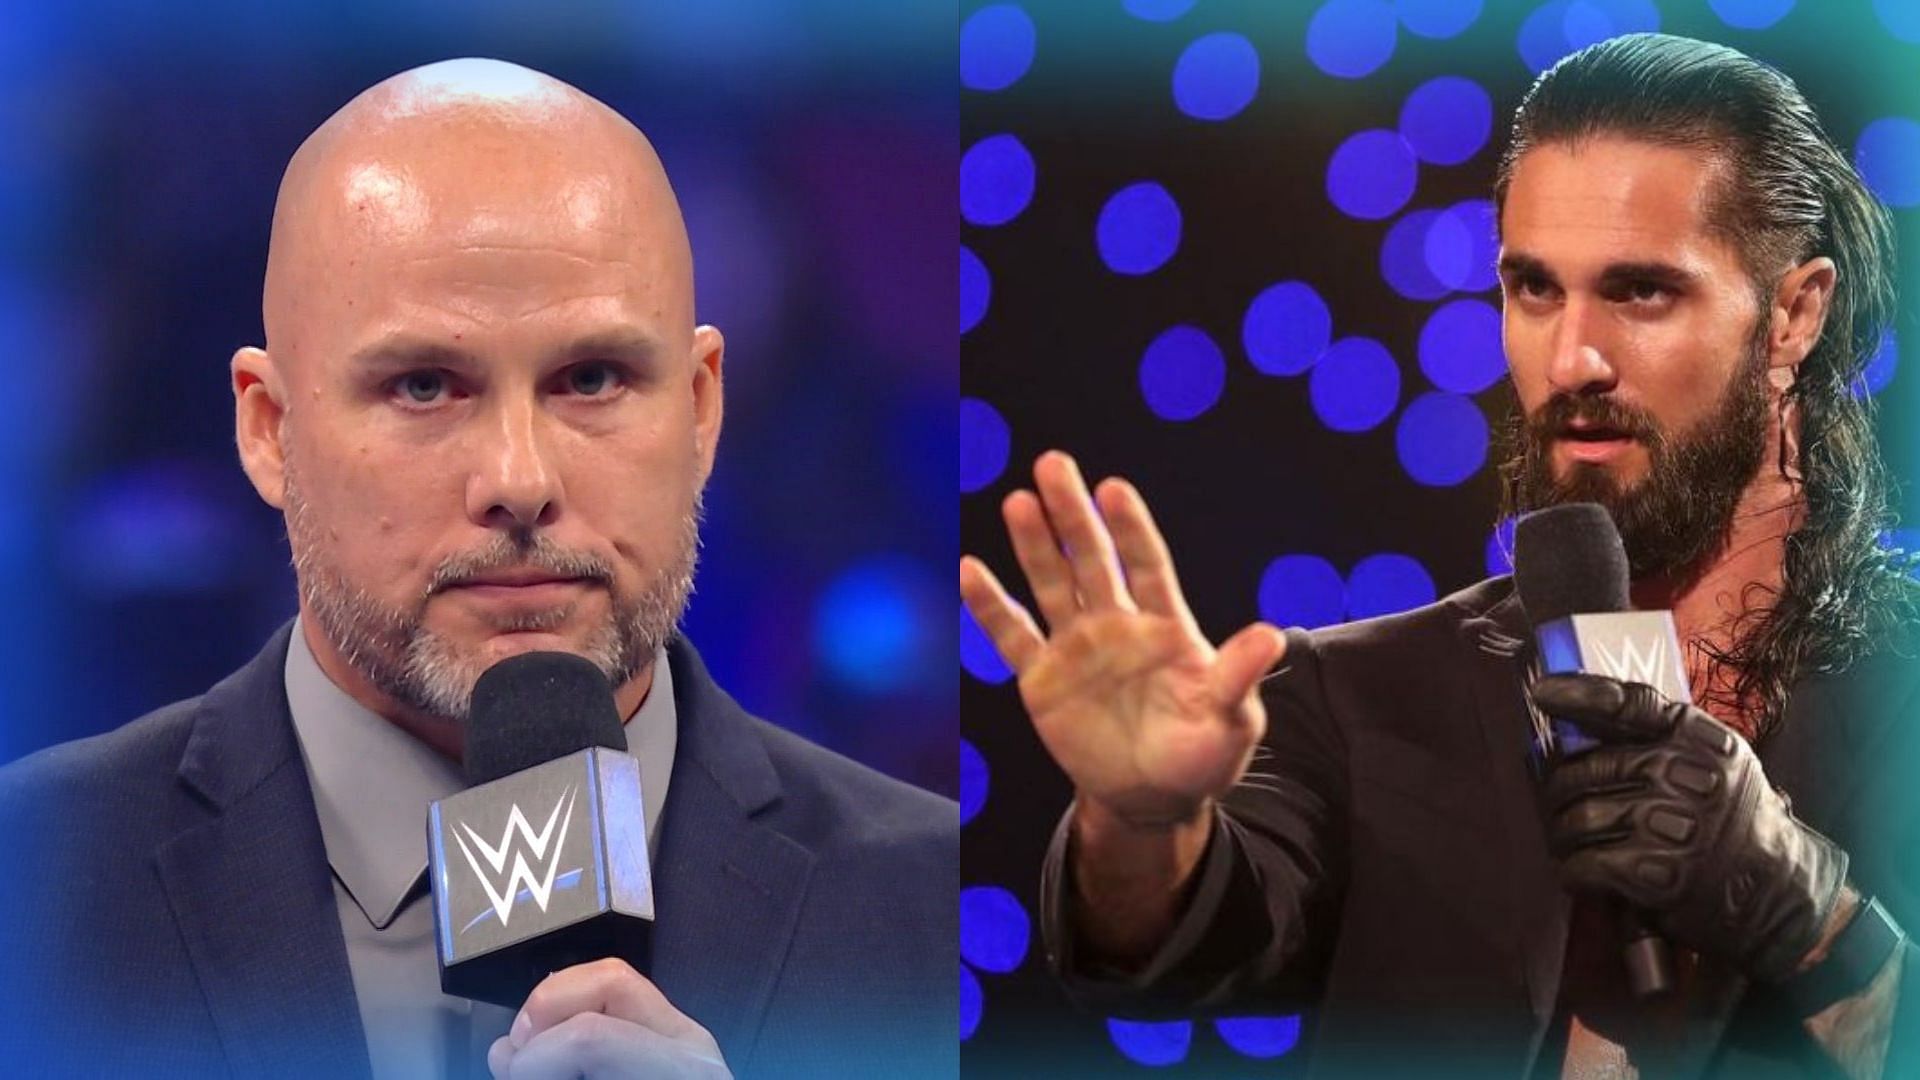 WWE Official Adam Pearce announced a battle royal featuring Seth Rollins to kick off SmackDown